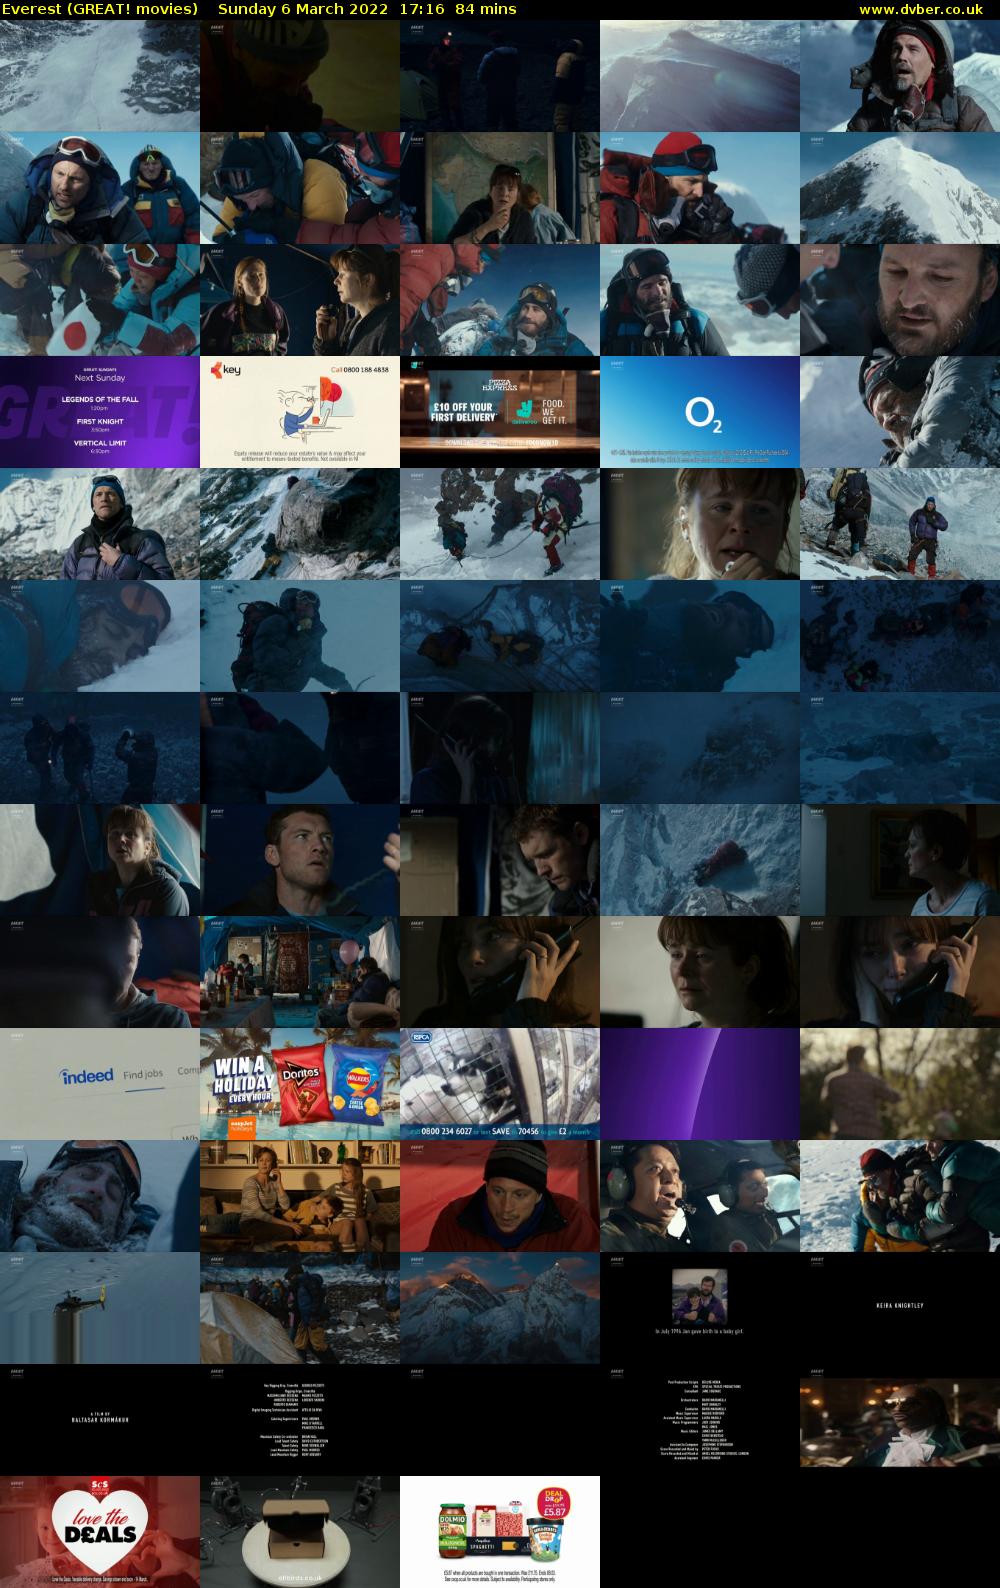 Everest (GREAT! movies) Sunday 6 March 2022 17:16 - 18:40